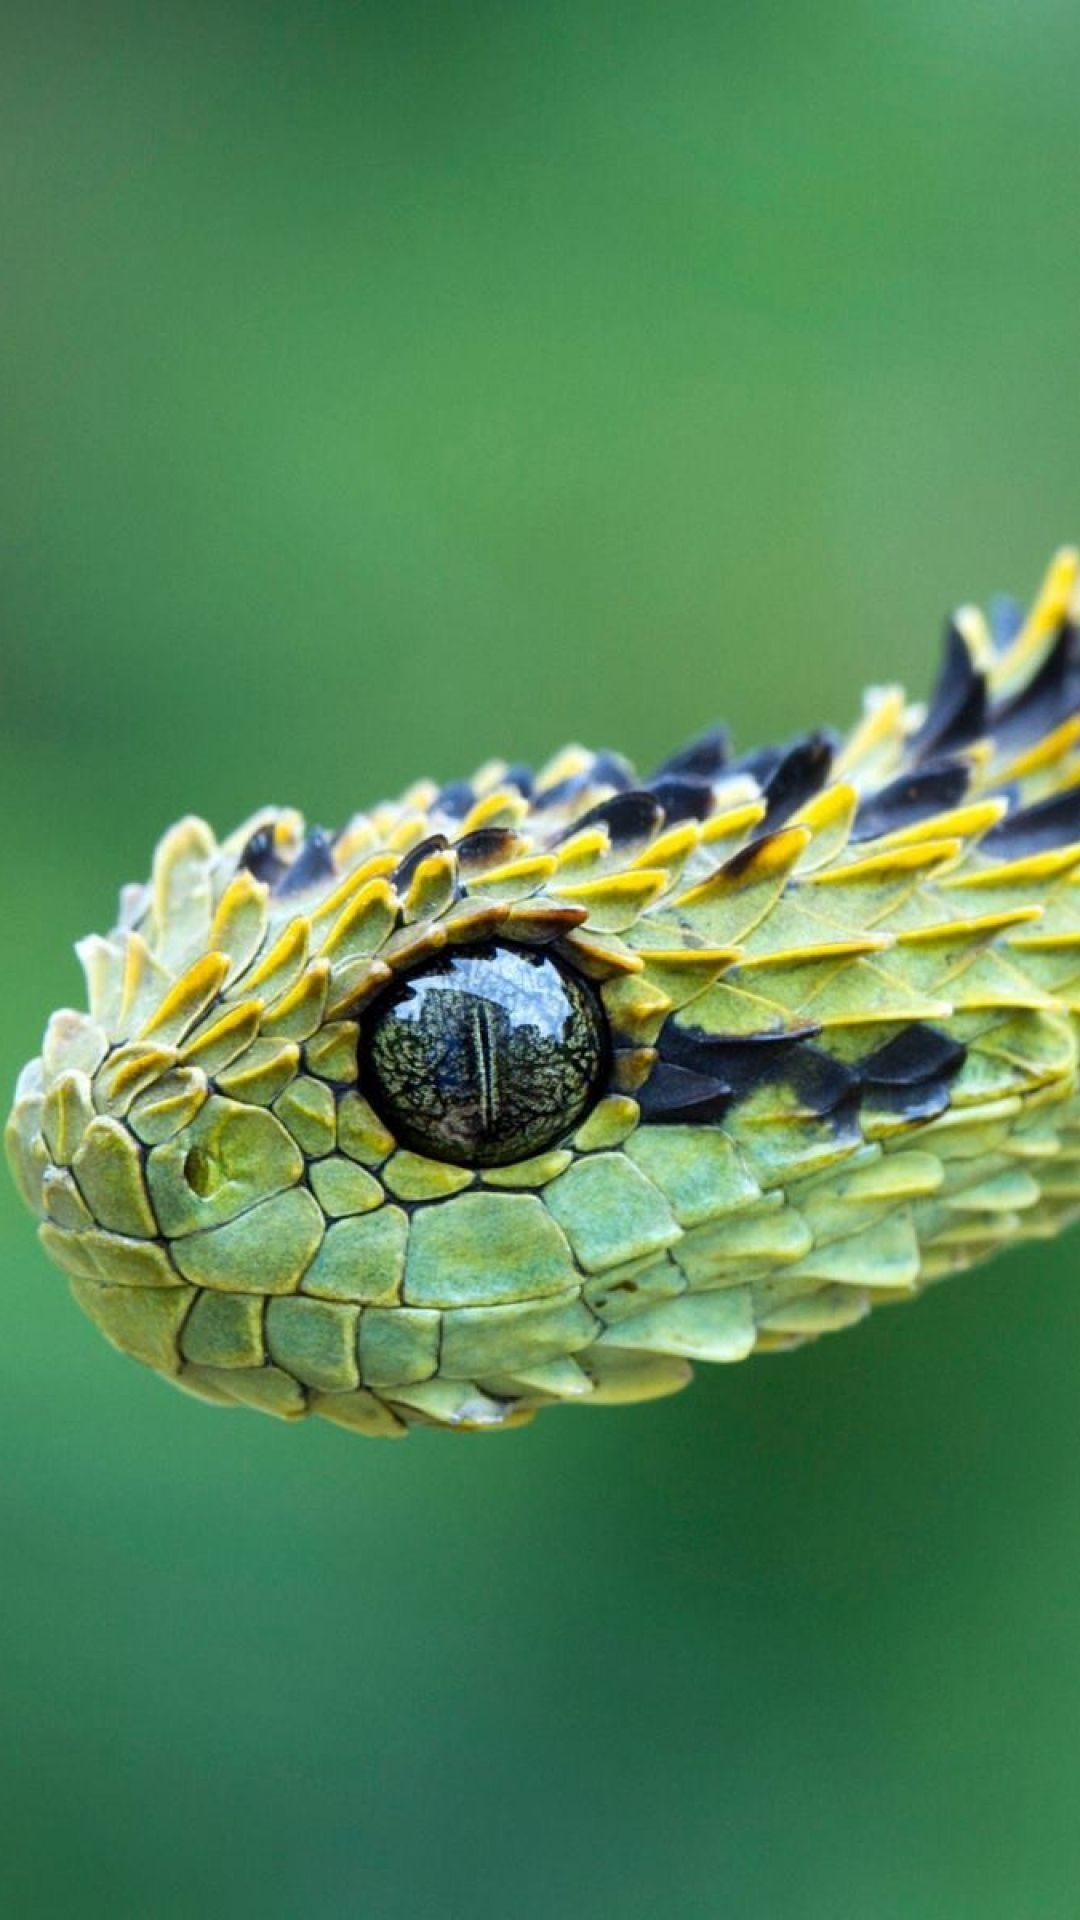 This snake has a dragon look. Snake, Snake scales, Reptiles and amphibians